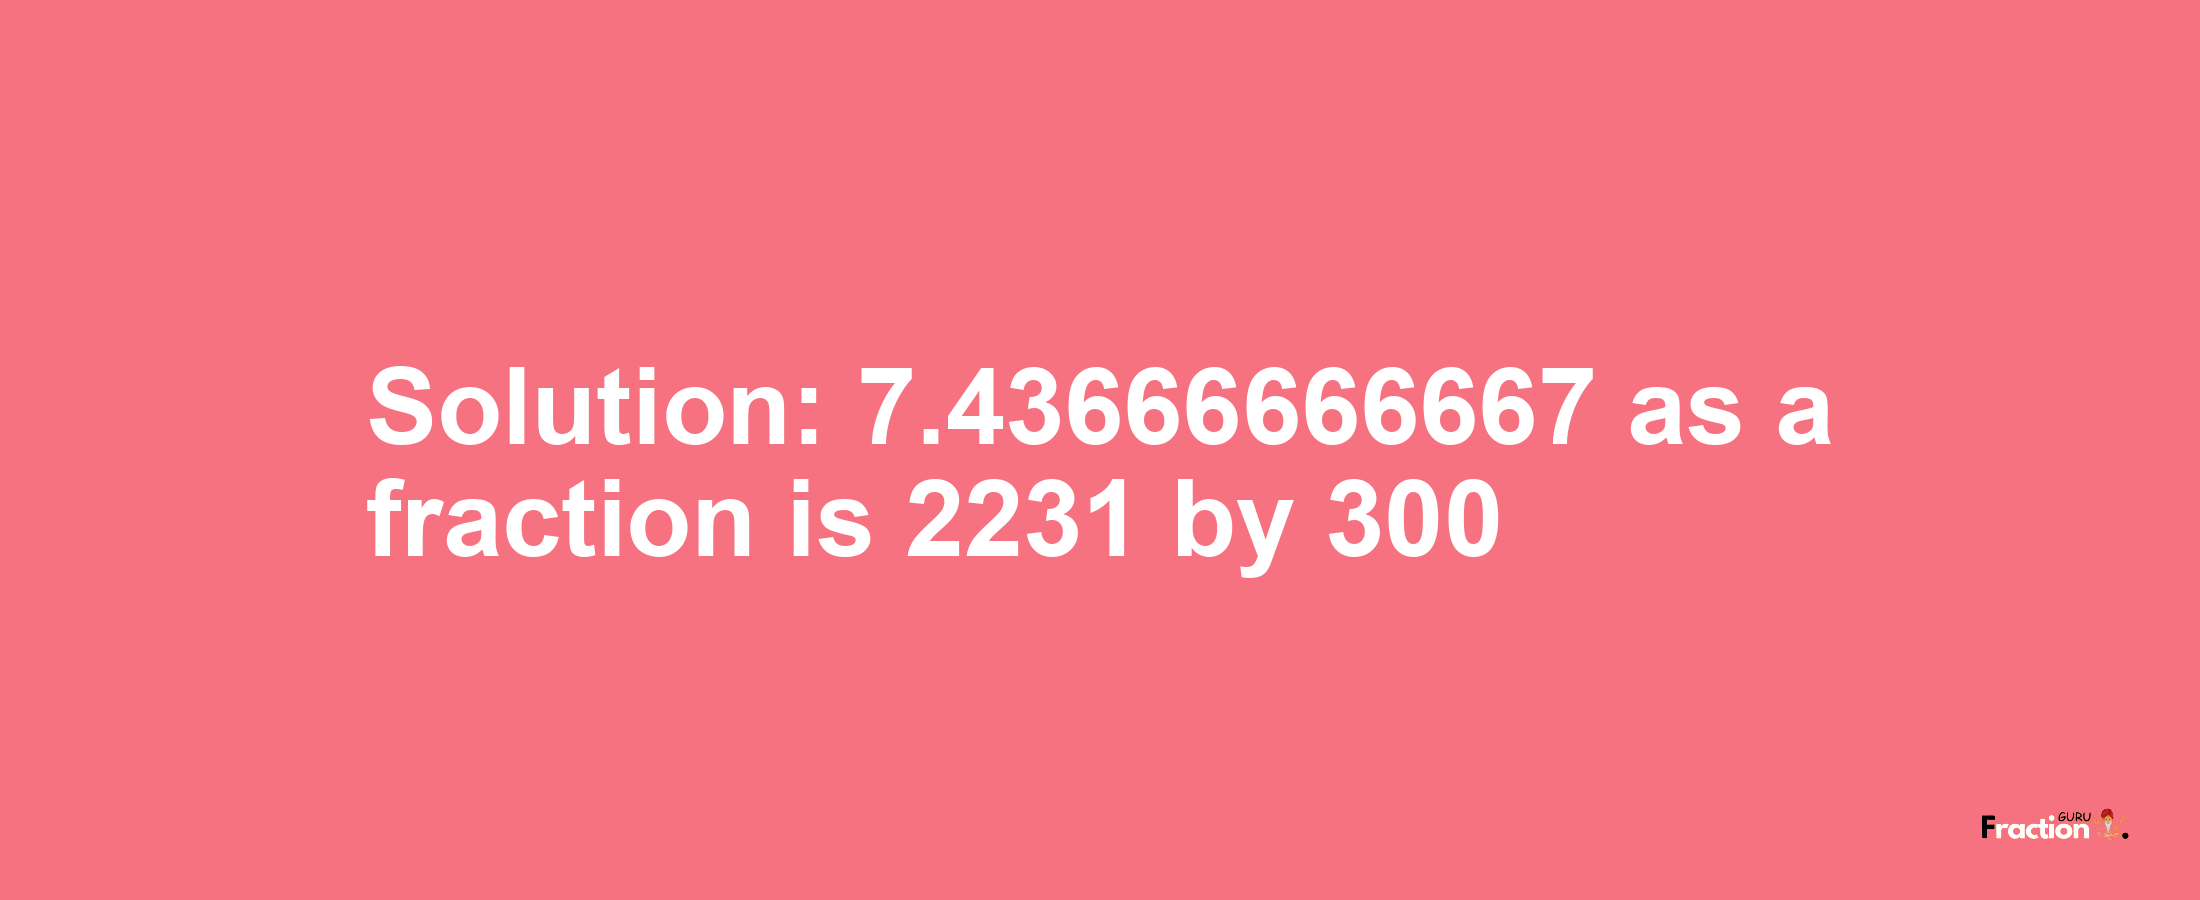 Solution:7.43666666667 as a fraction is 2231/300